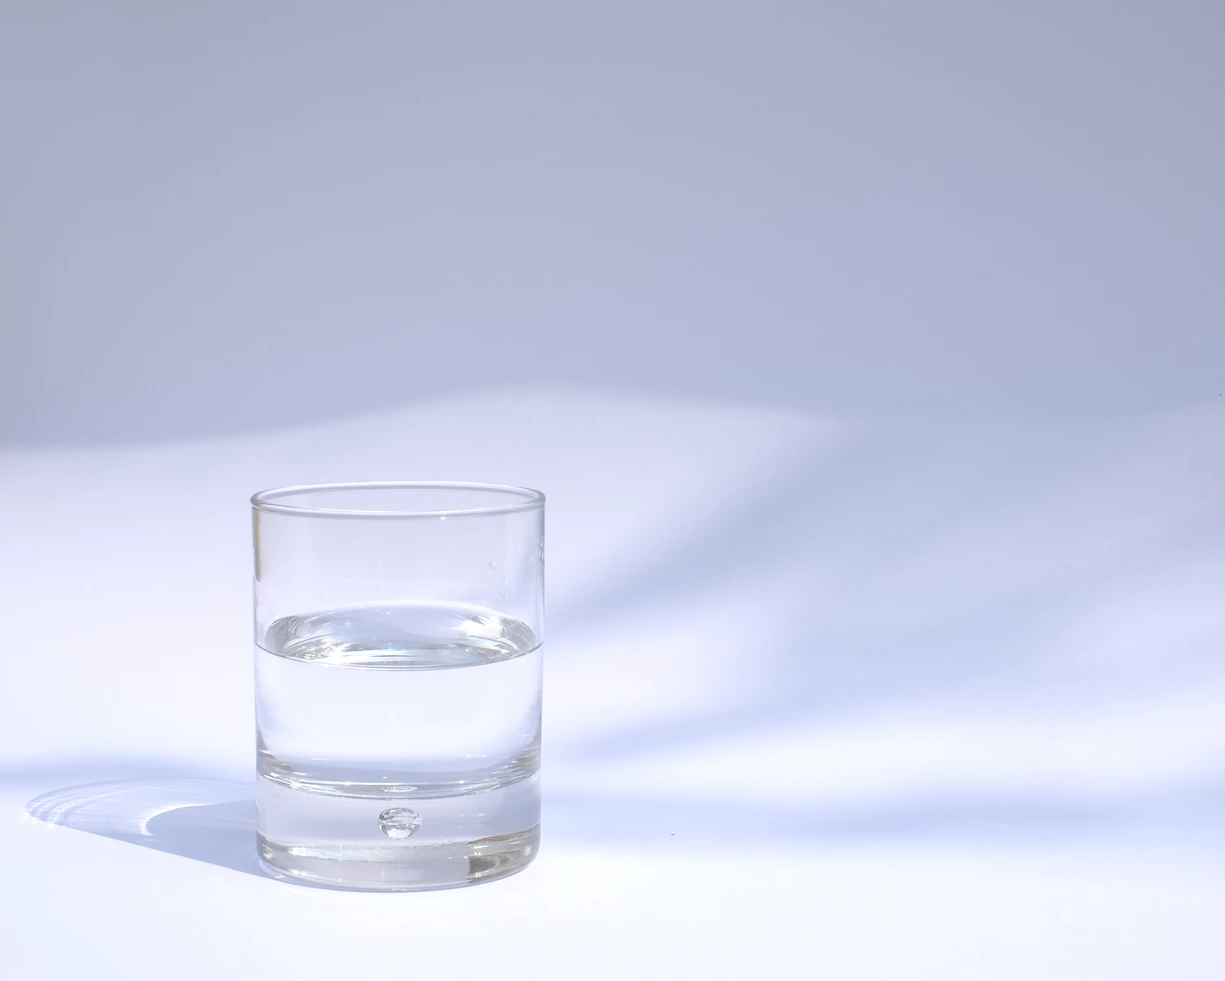 glass of water on a white desk